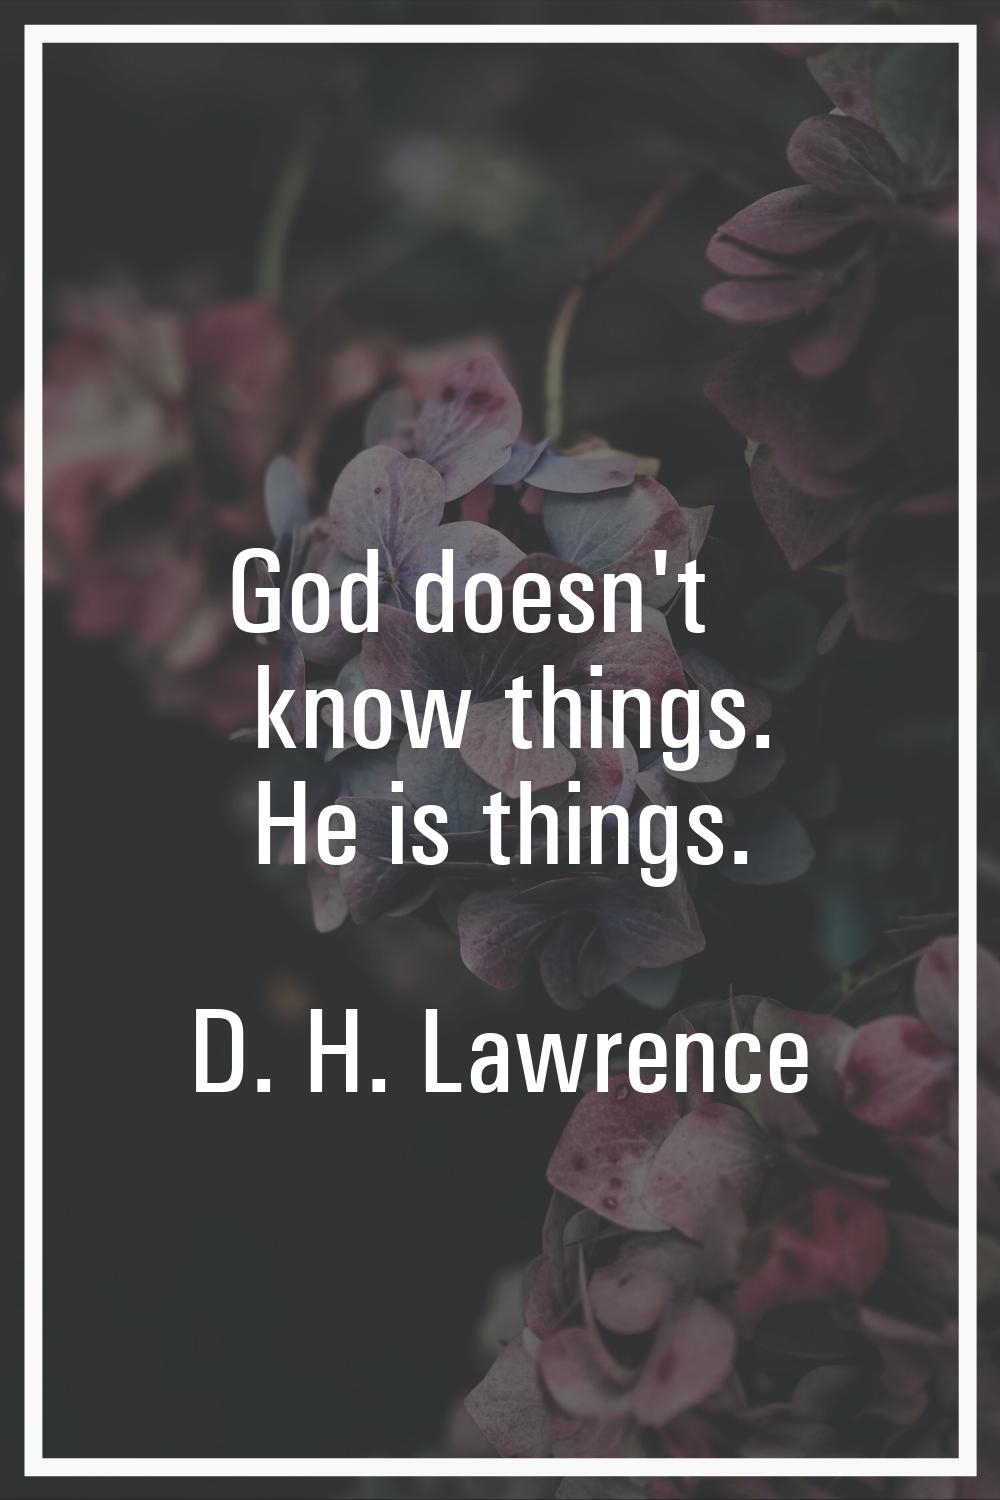 God doesn't know things. He is things.